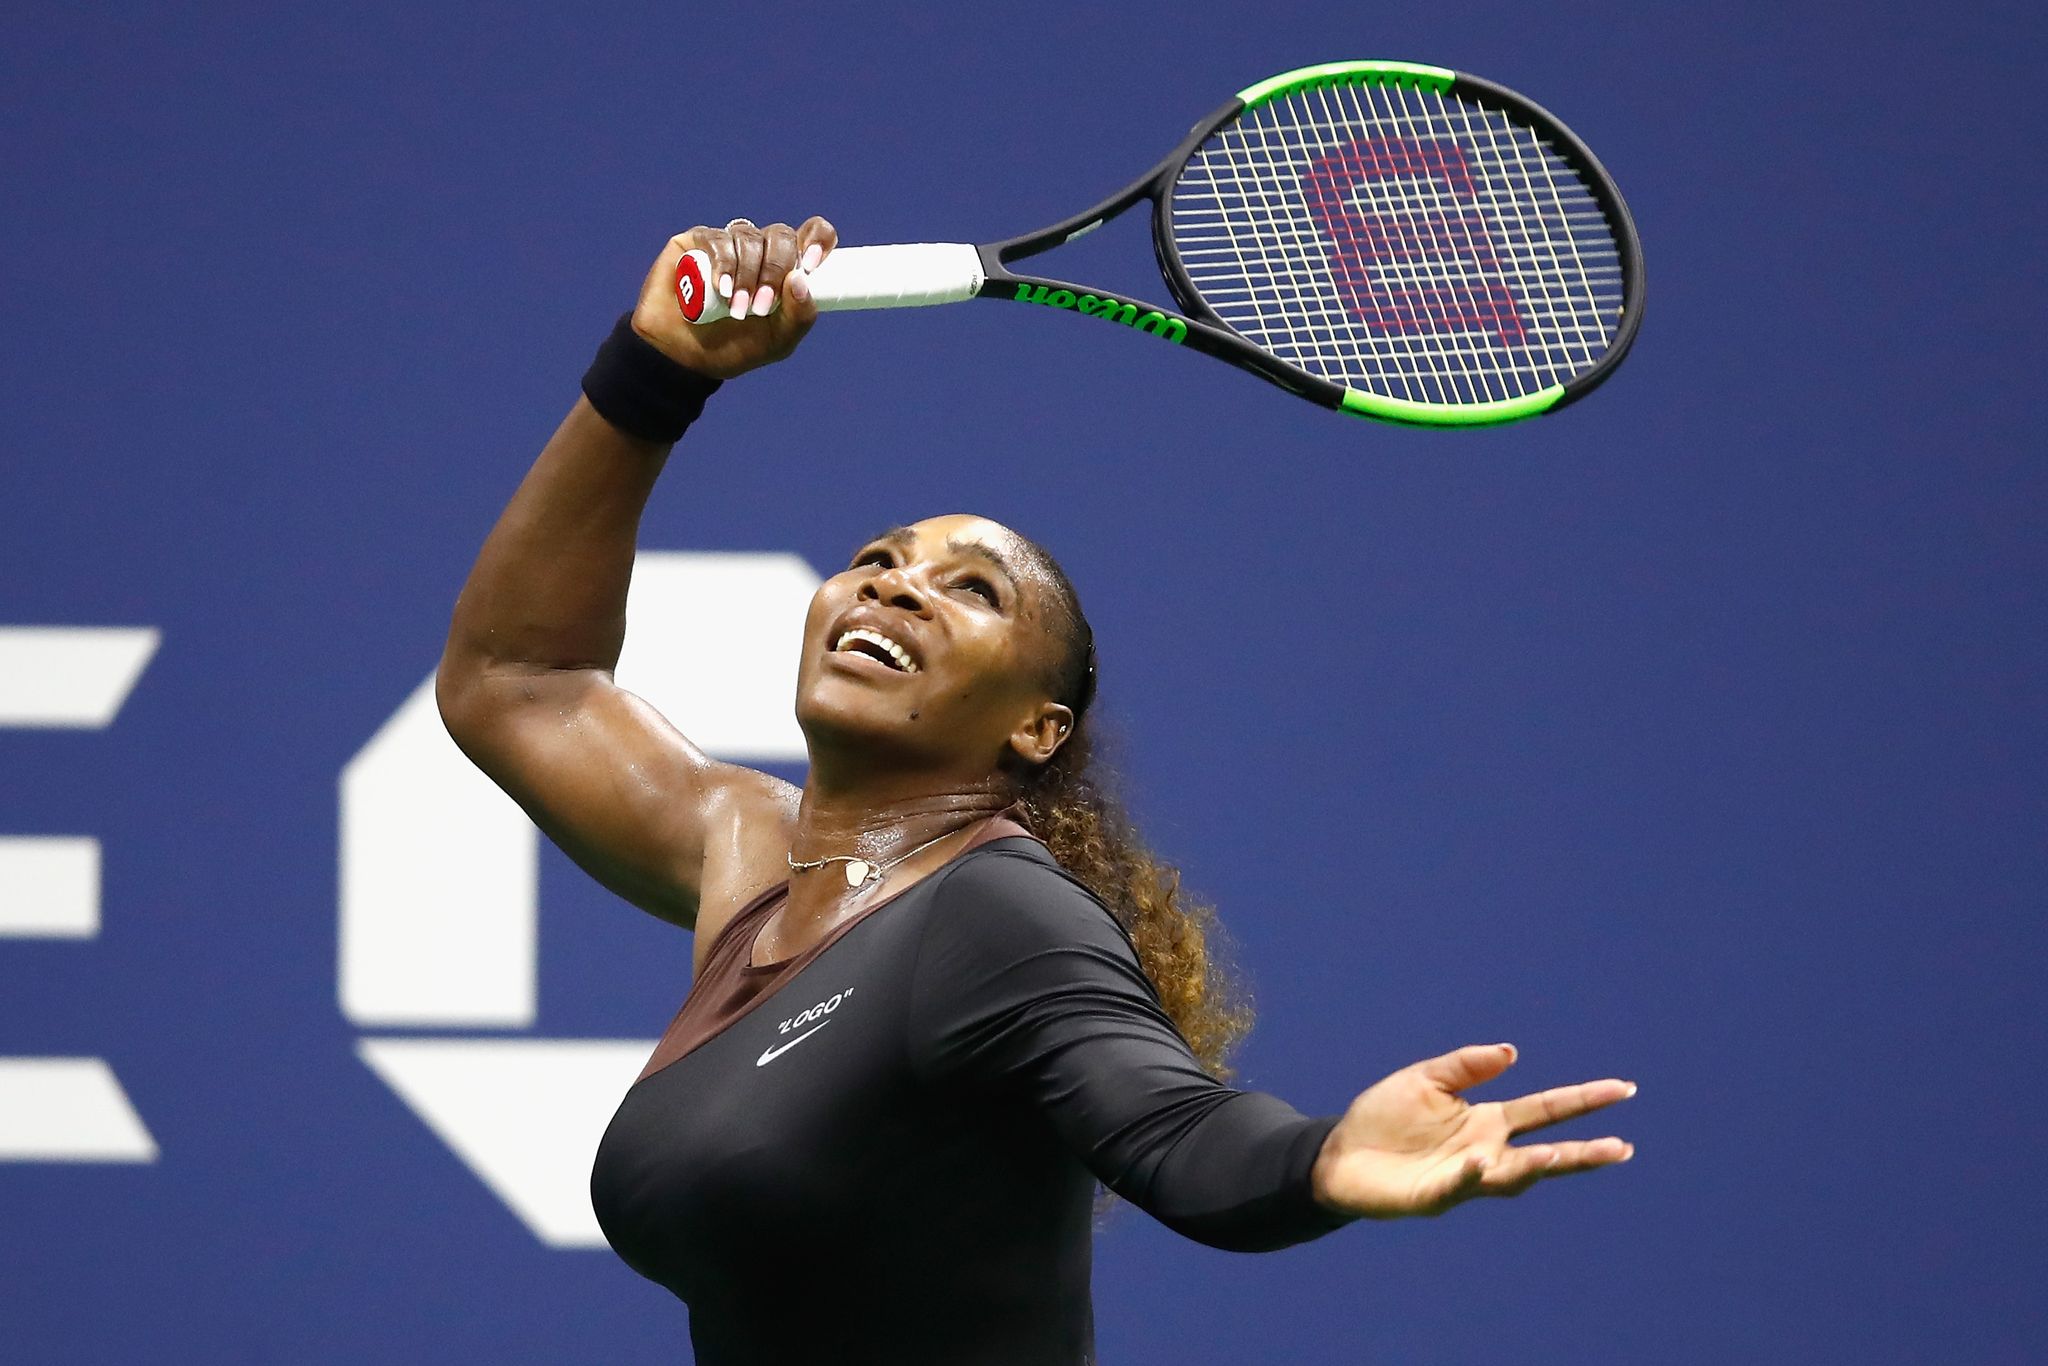 2018 US Open - Day 1